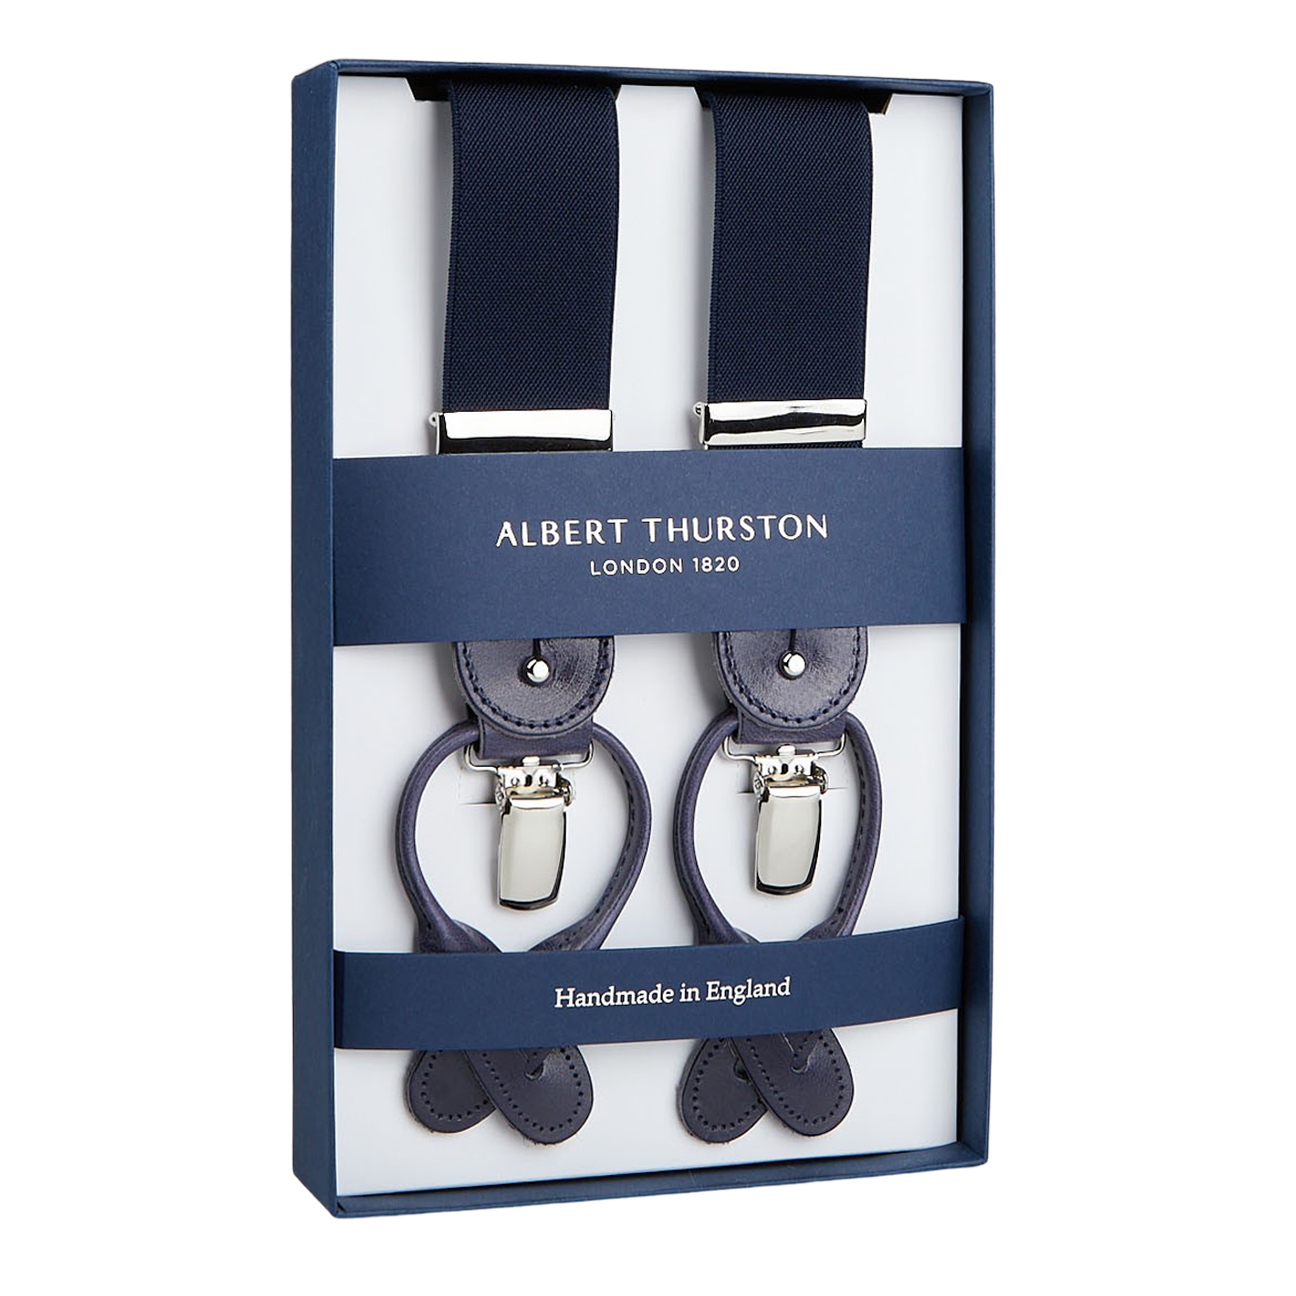 A pair of Albert Thurston Navy Elastic Nylon 35 mm Braces packaged in a box, indicating they are handmade in England.